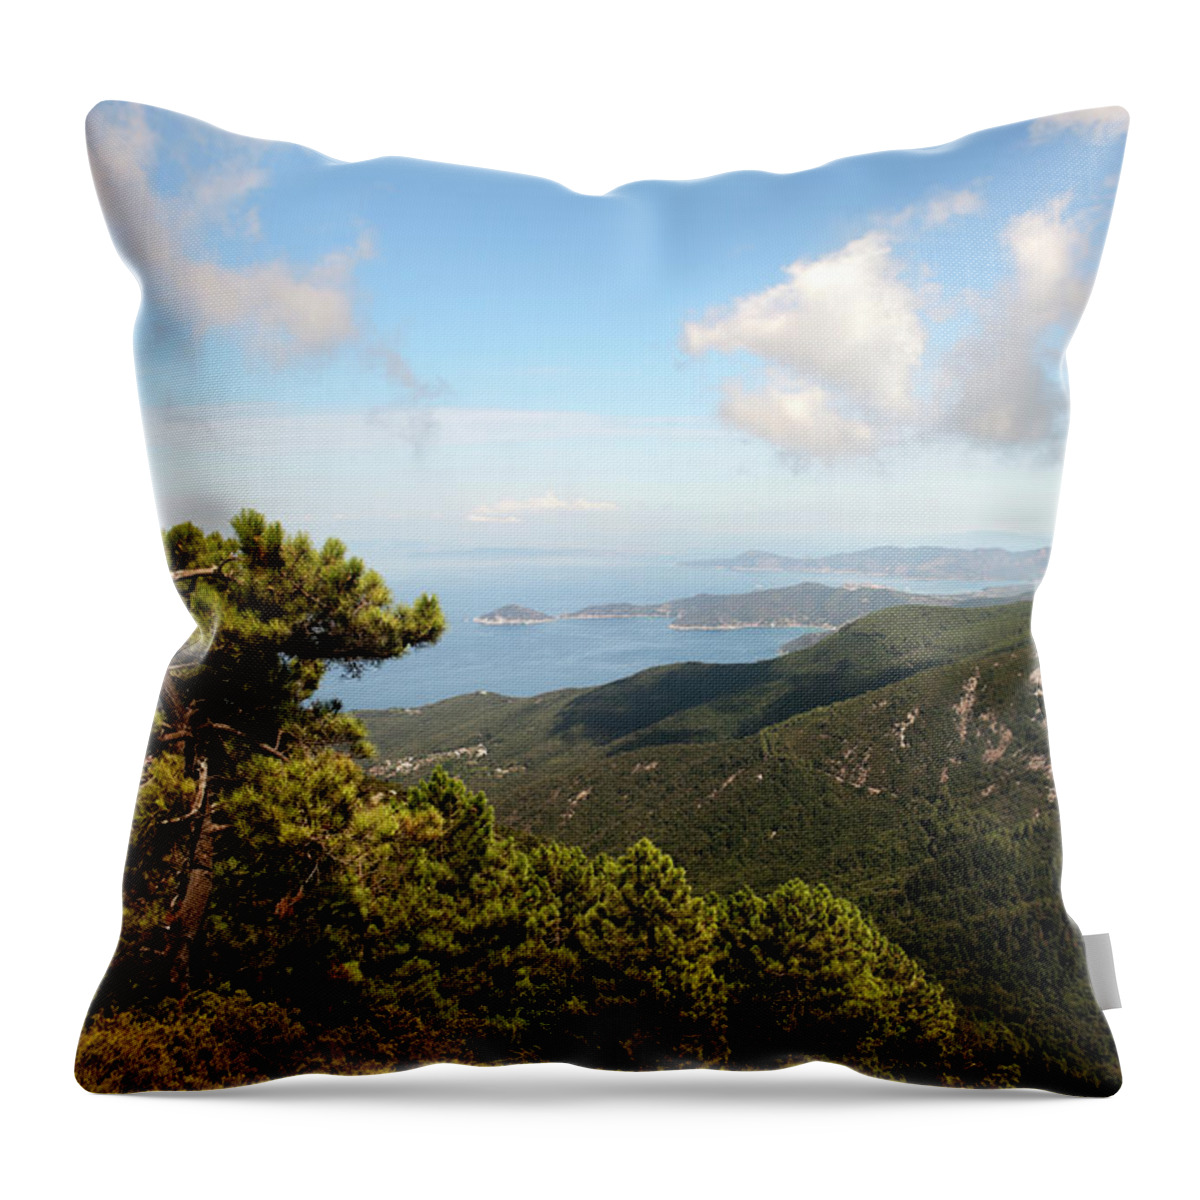 Tyrrhenian Sea Throw Pillow featuring the photograph Overview Of Elba Island by Scacciamosche